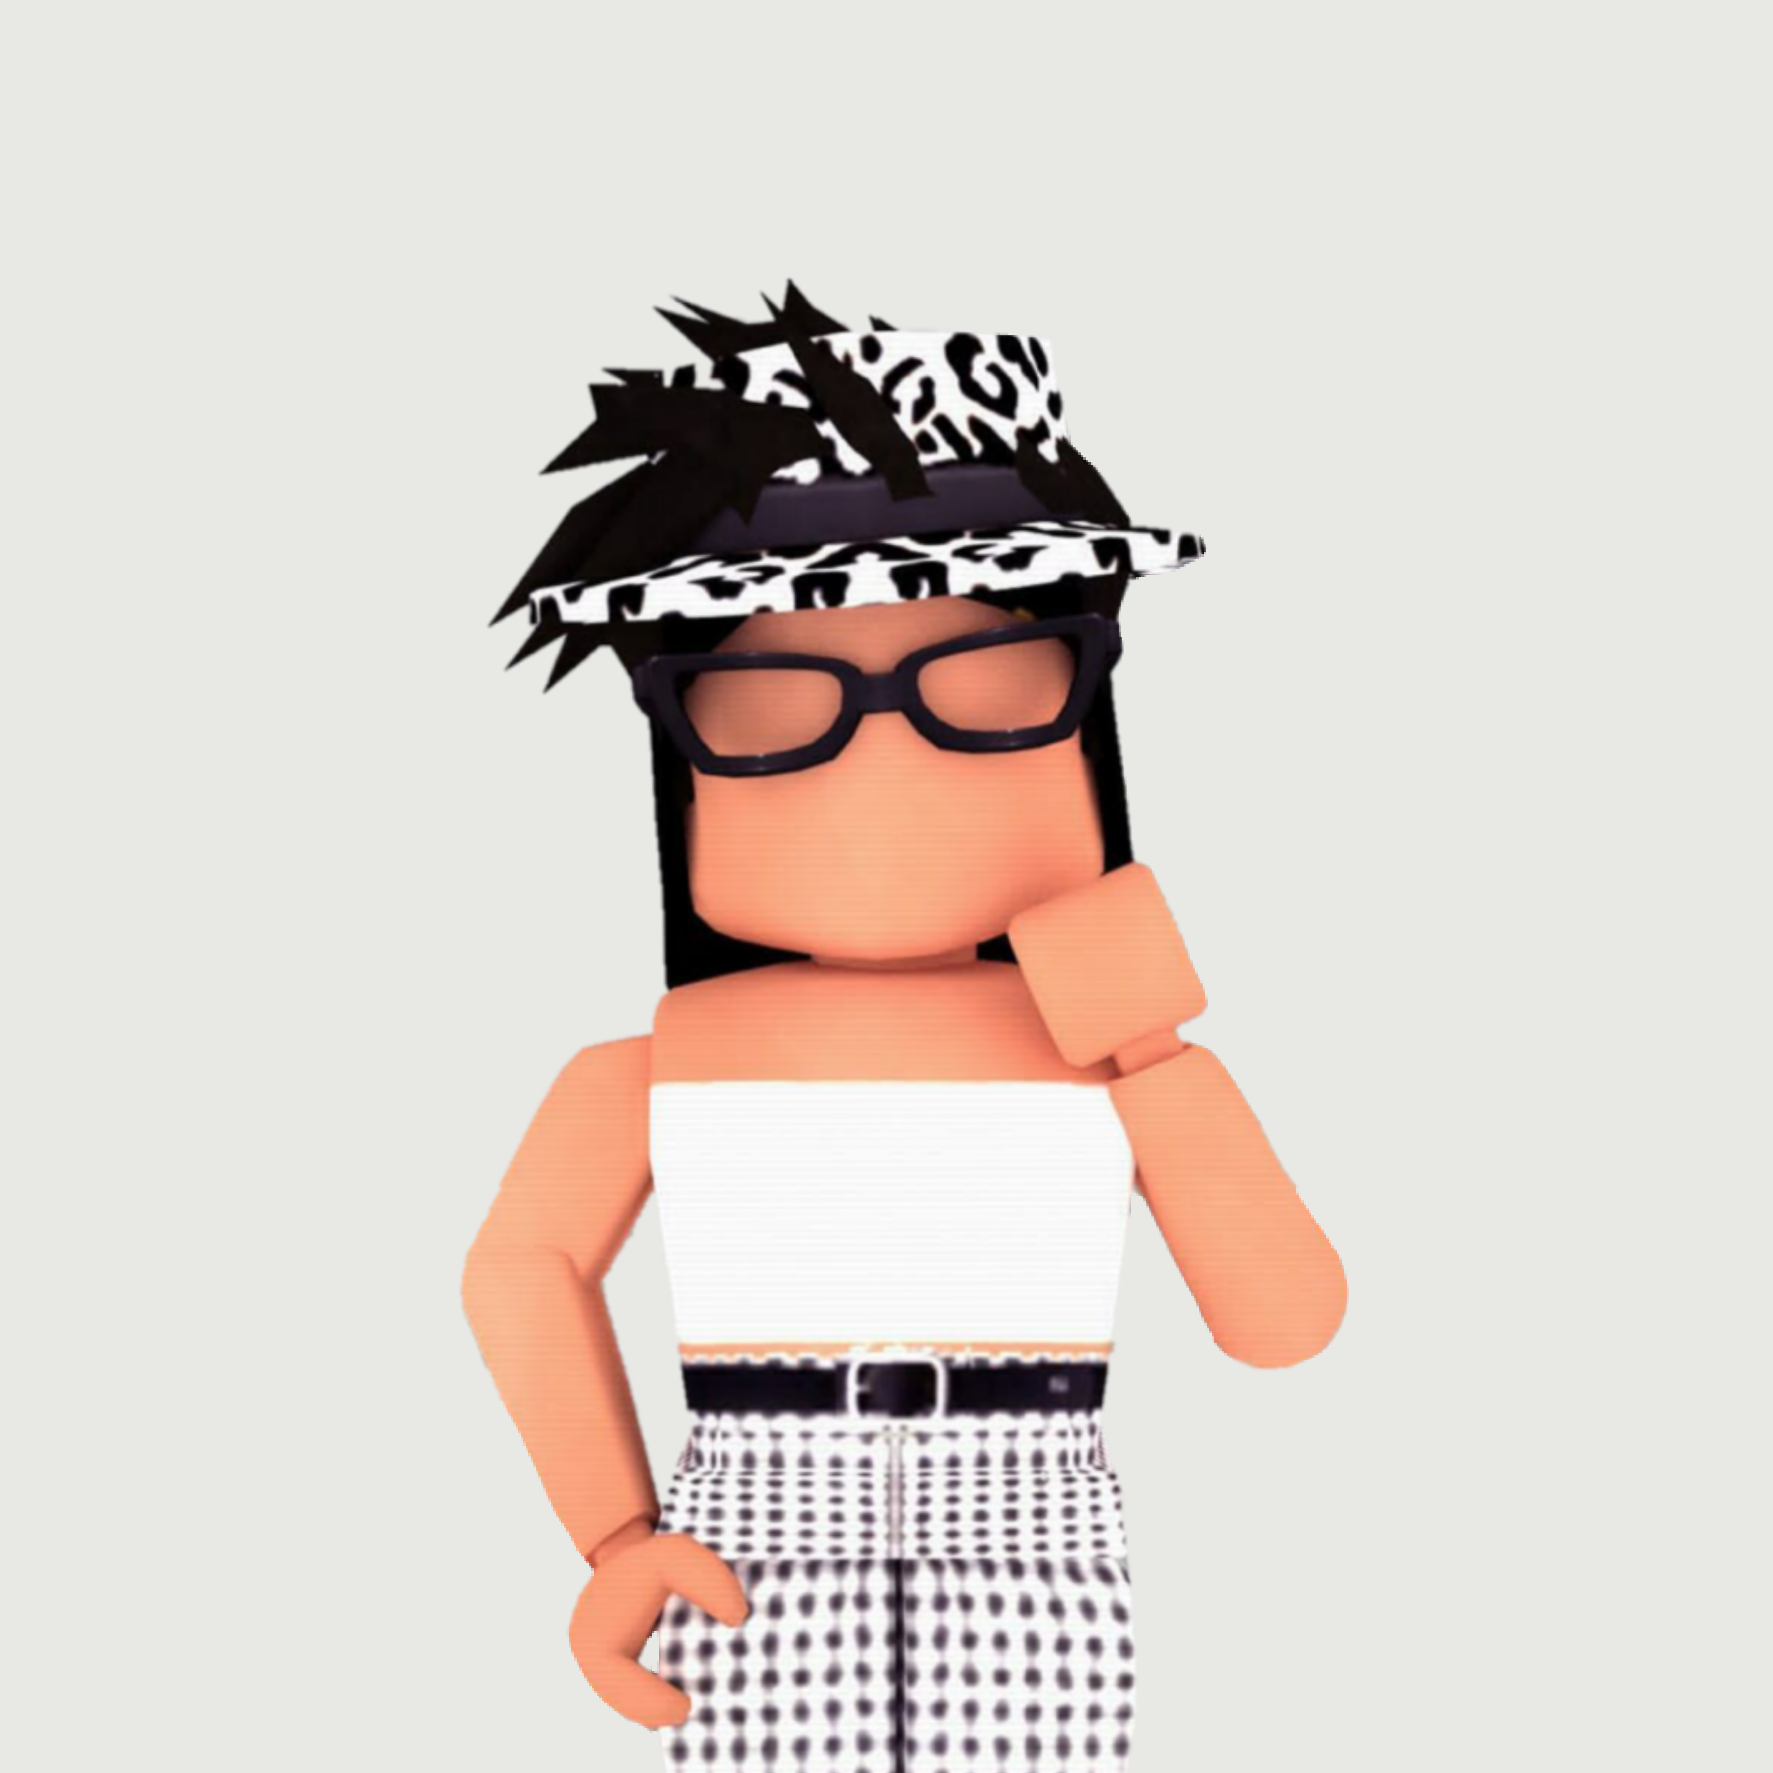 Freetoedit Tumblr Image By Roblox Girl Gfx - roblox girl gfx white background